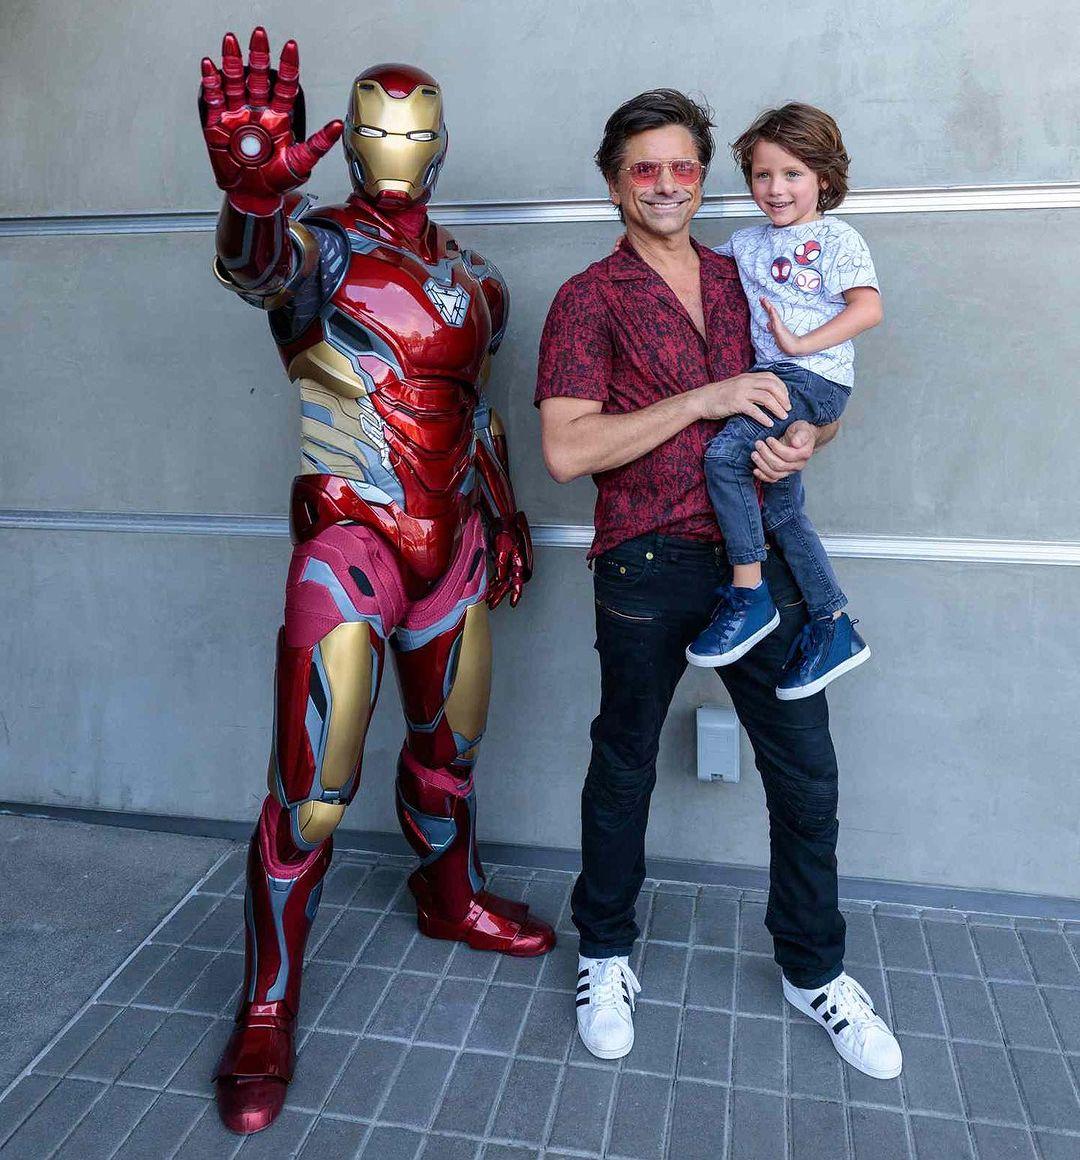 John Stamos and son Billy